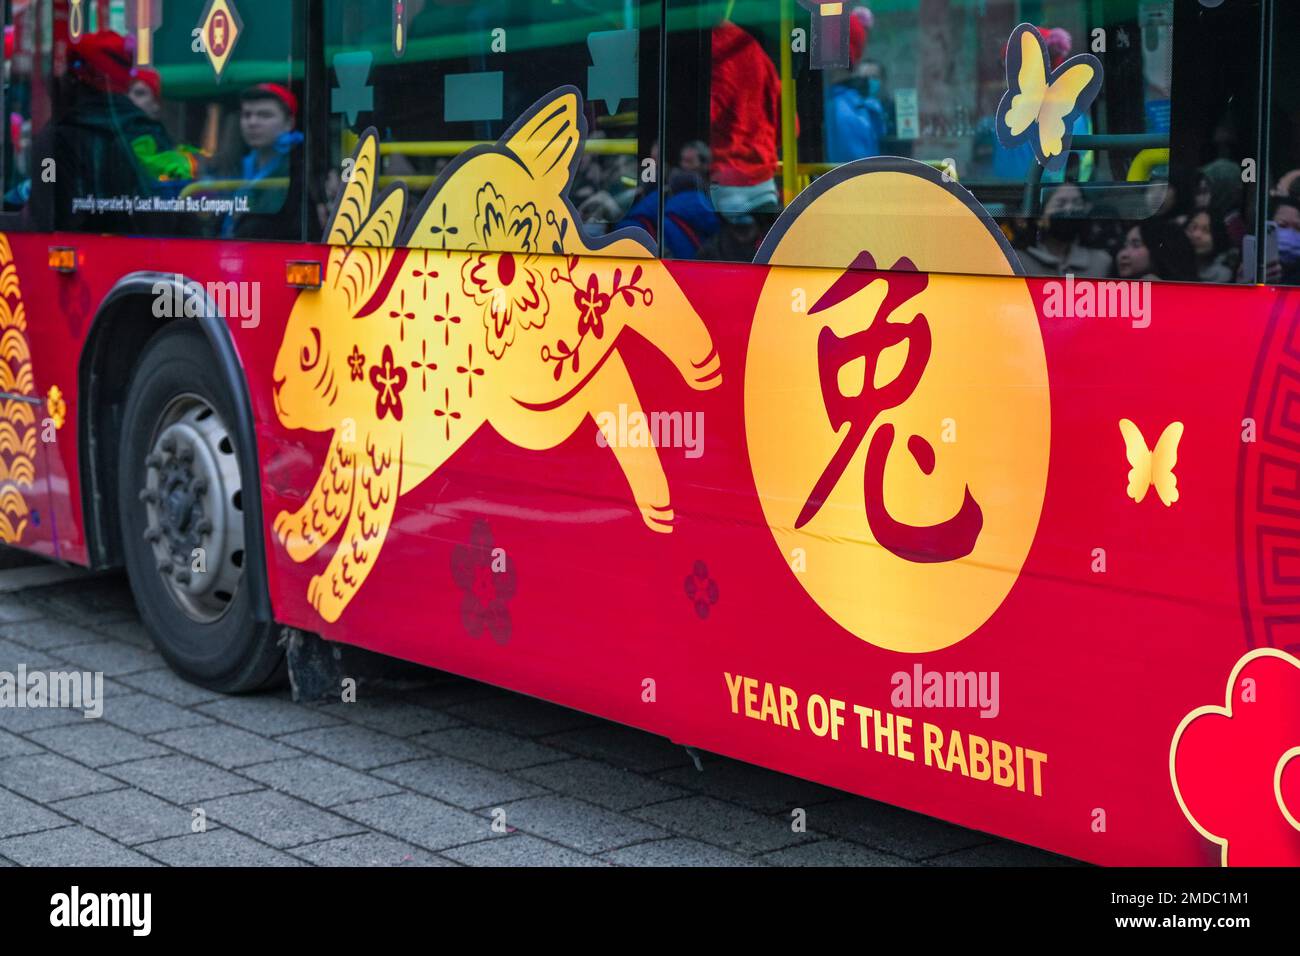 Year of the Rabbit bus, Chinese Lunar New Year Parade, Chinatown, Vancouver, British Columbia, Canada Stock Photo